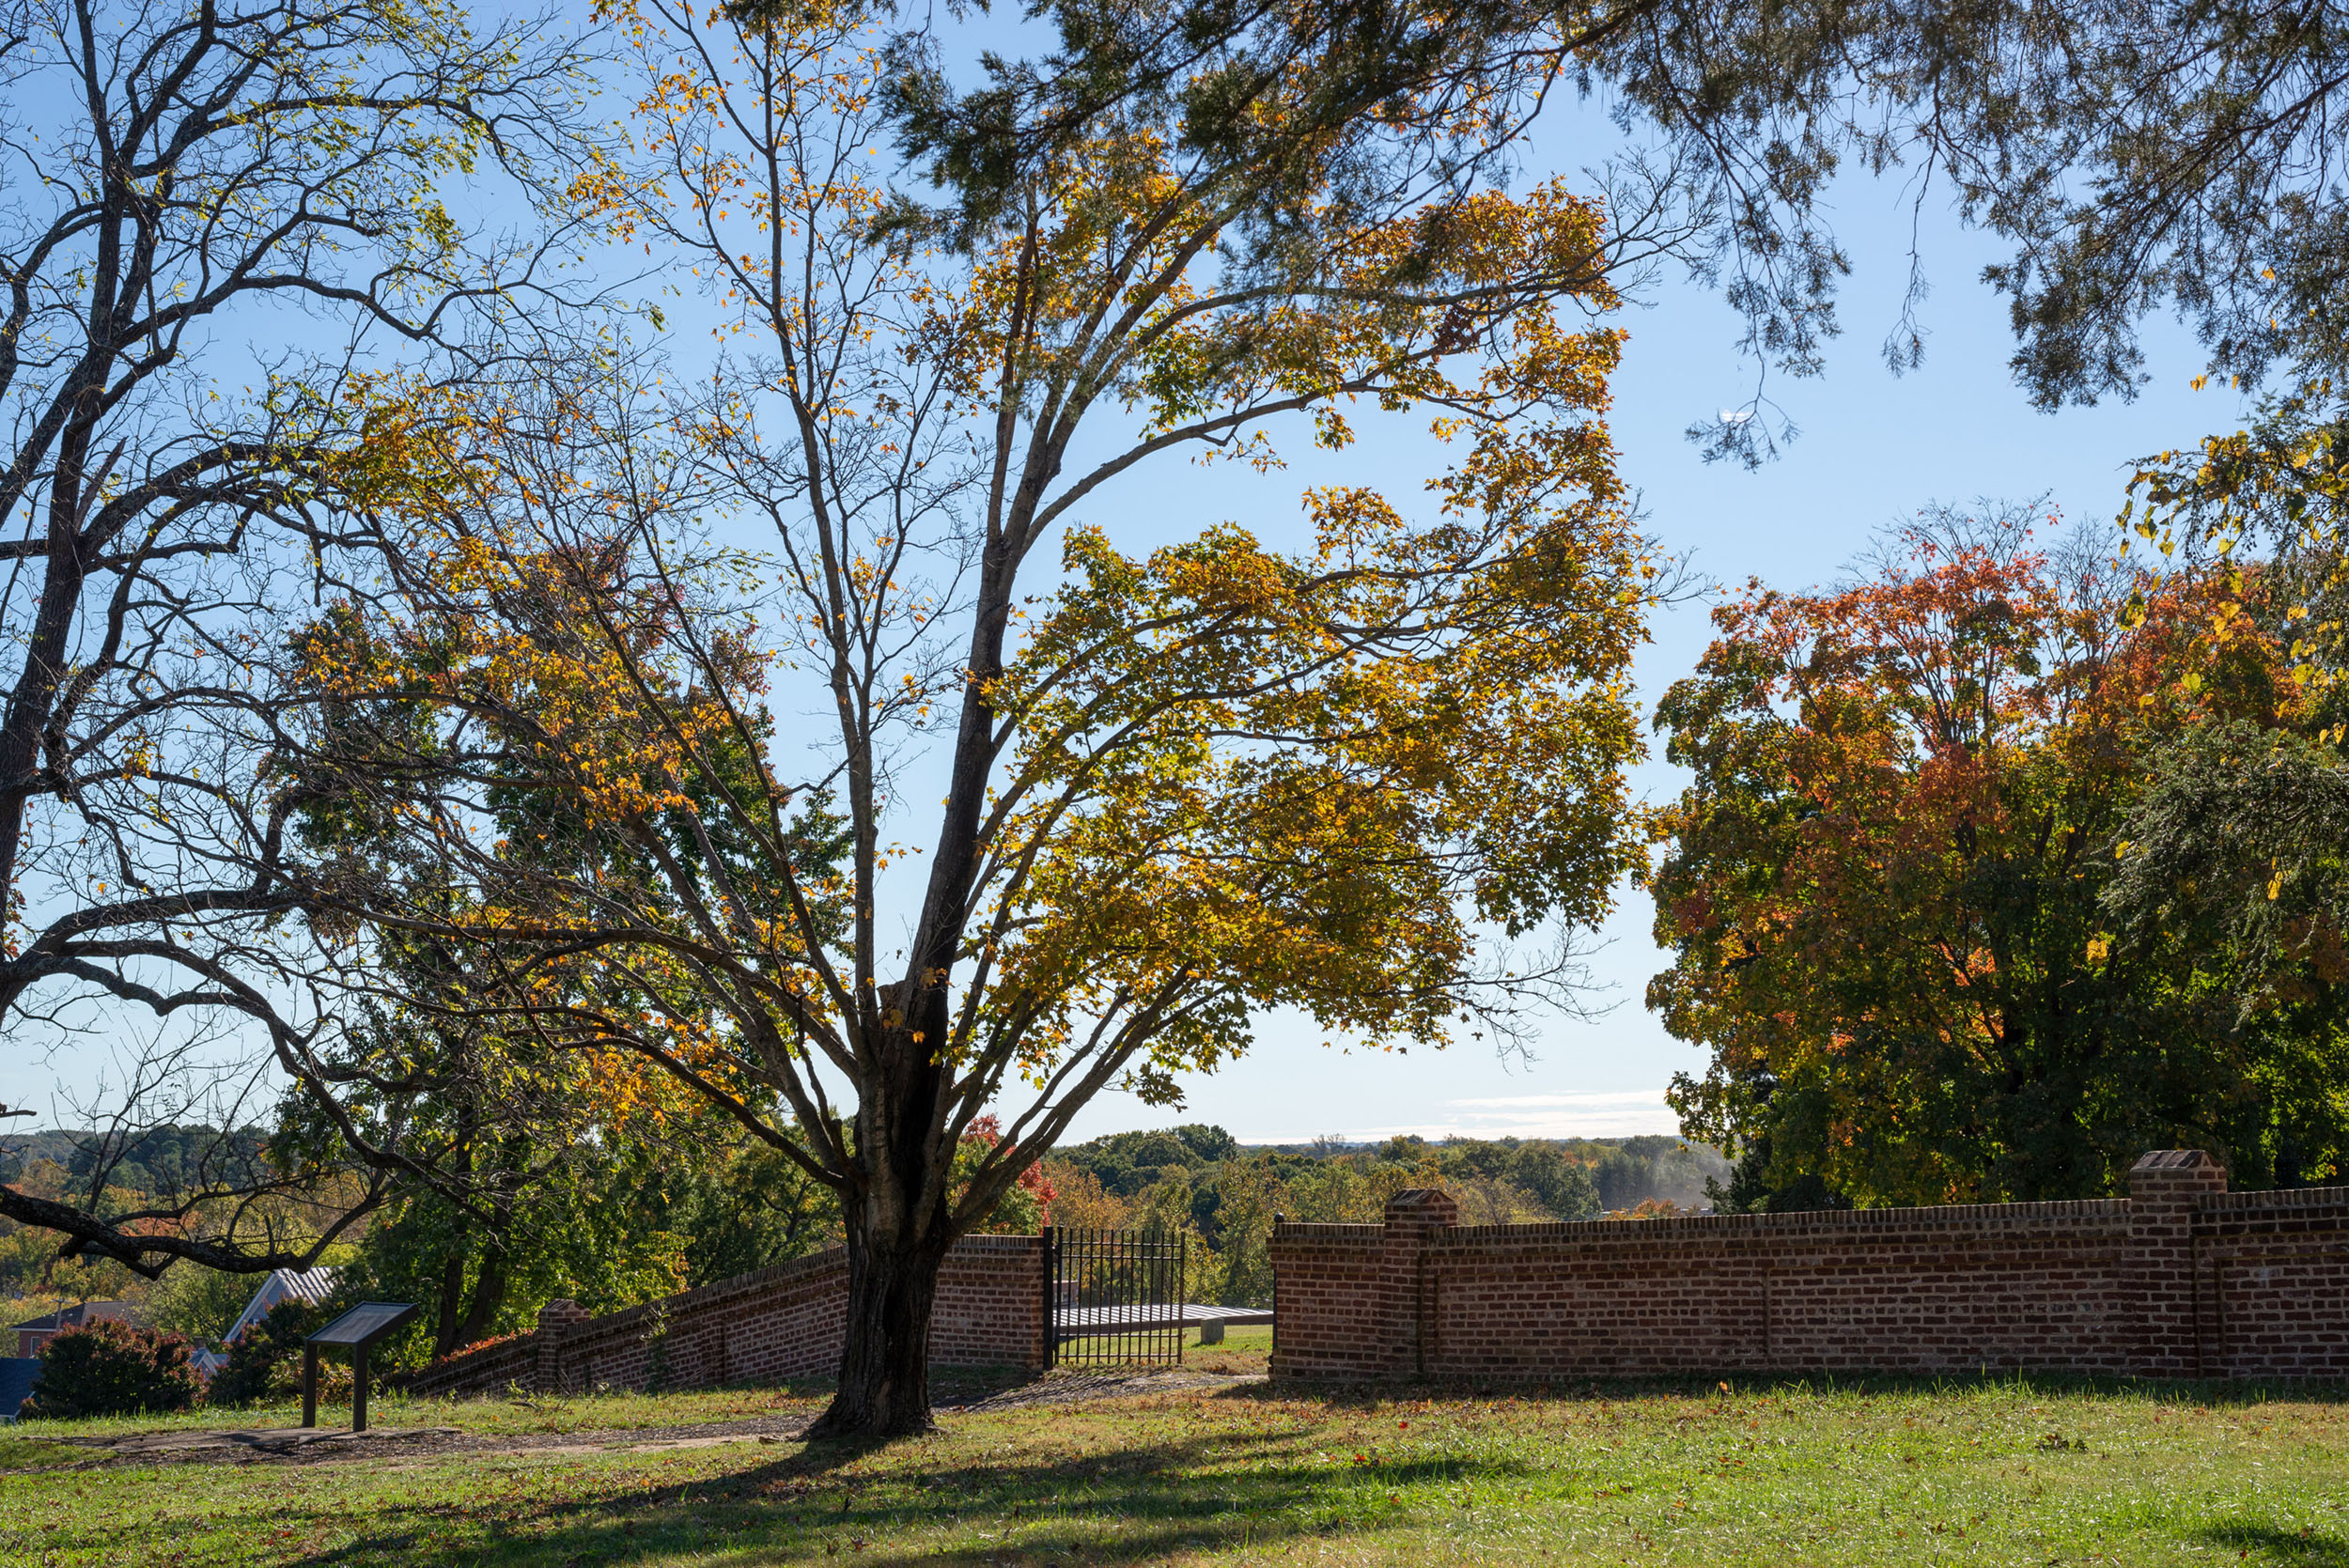 A view across a mowed field to a brick wall leading to a cemetery.